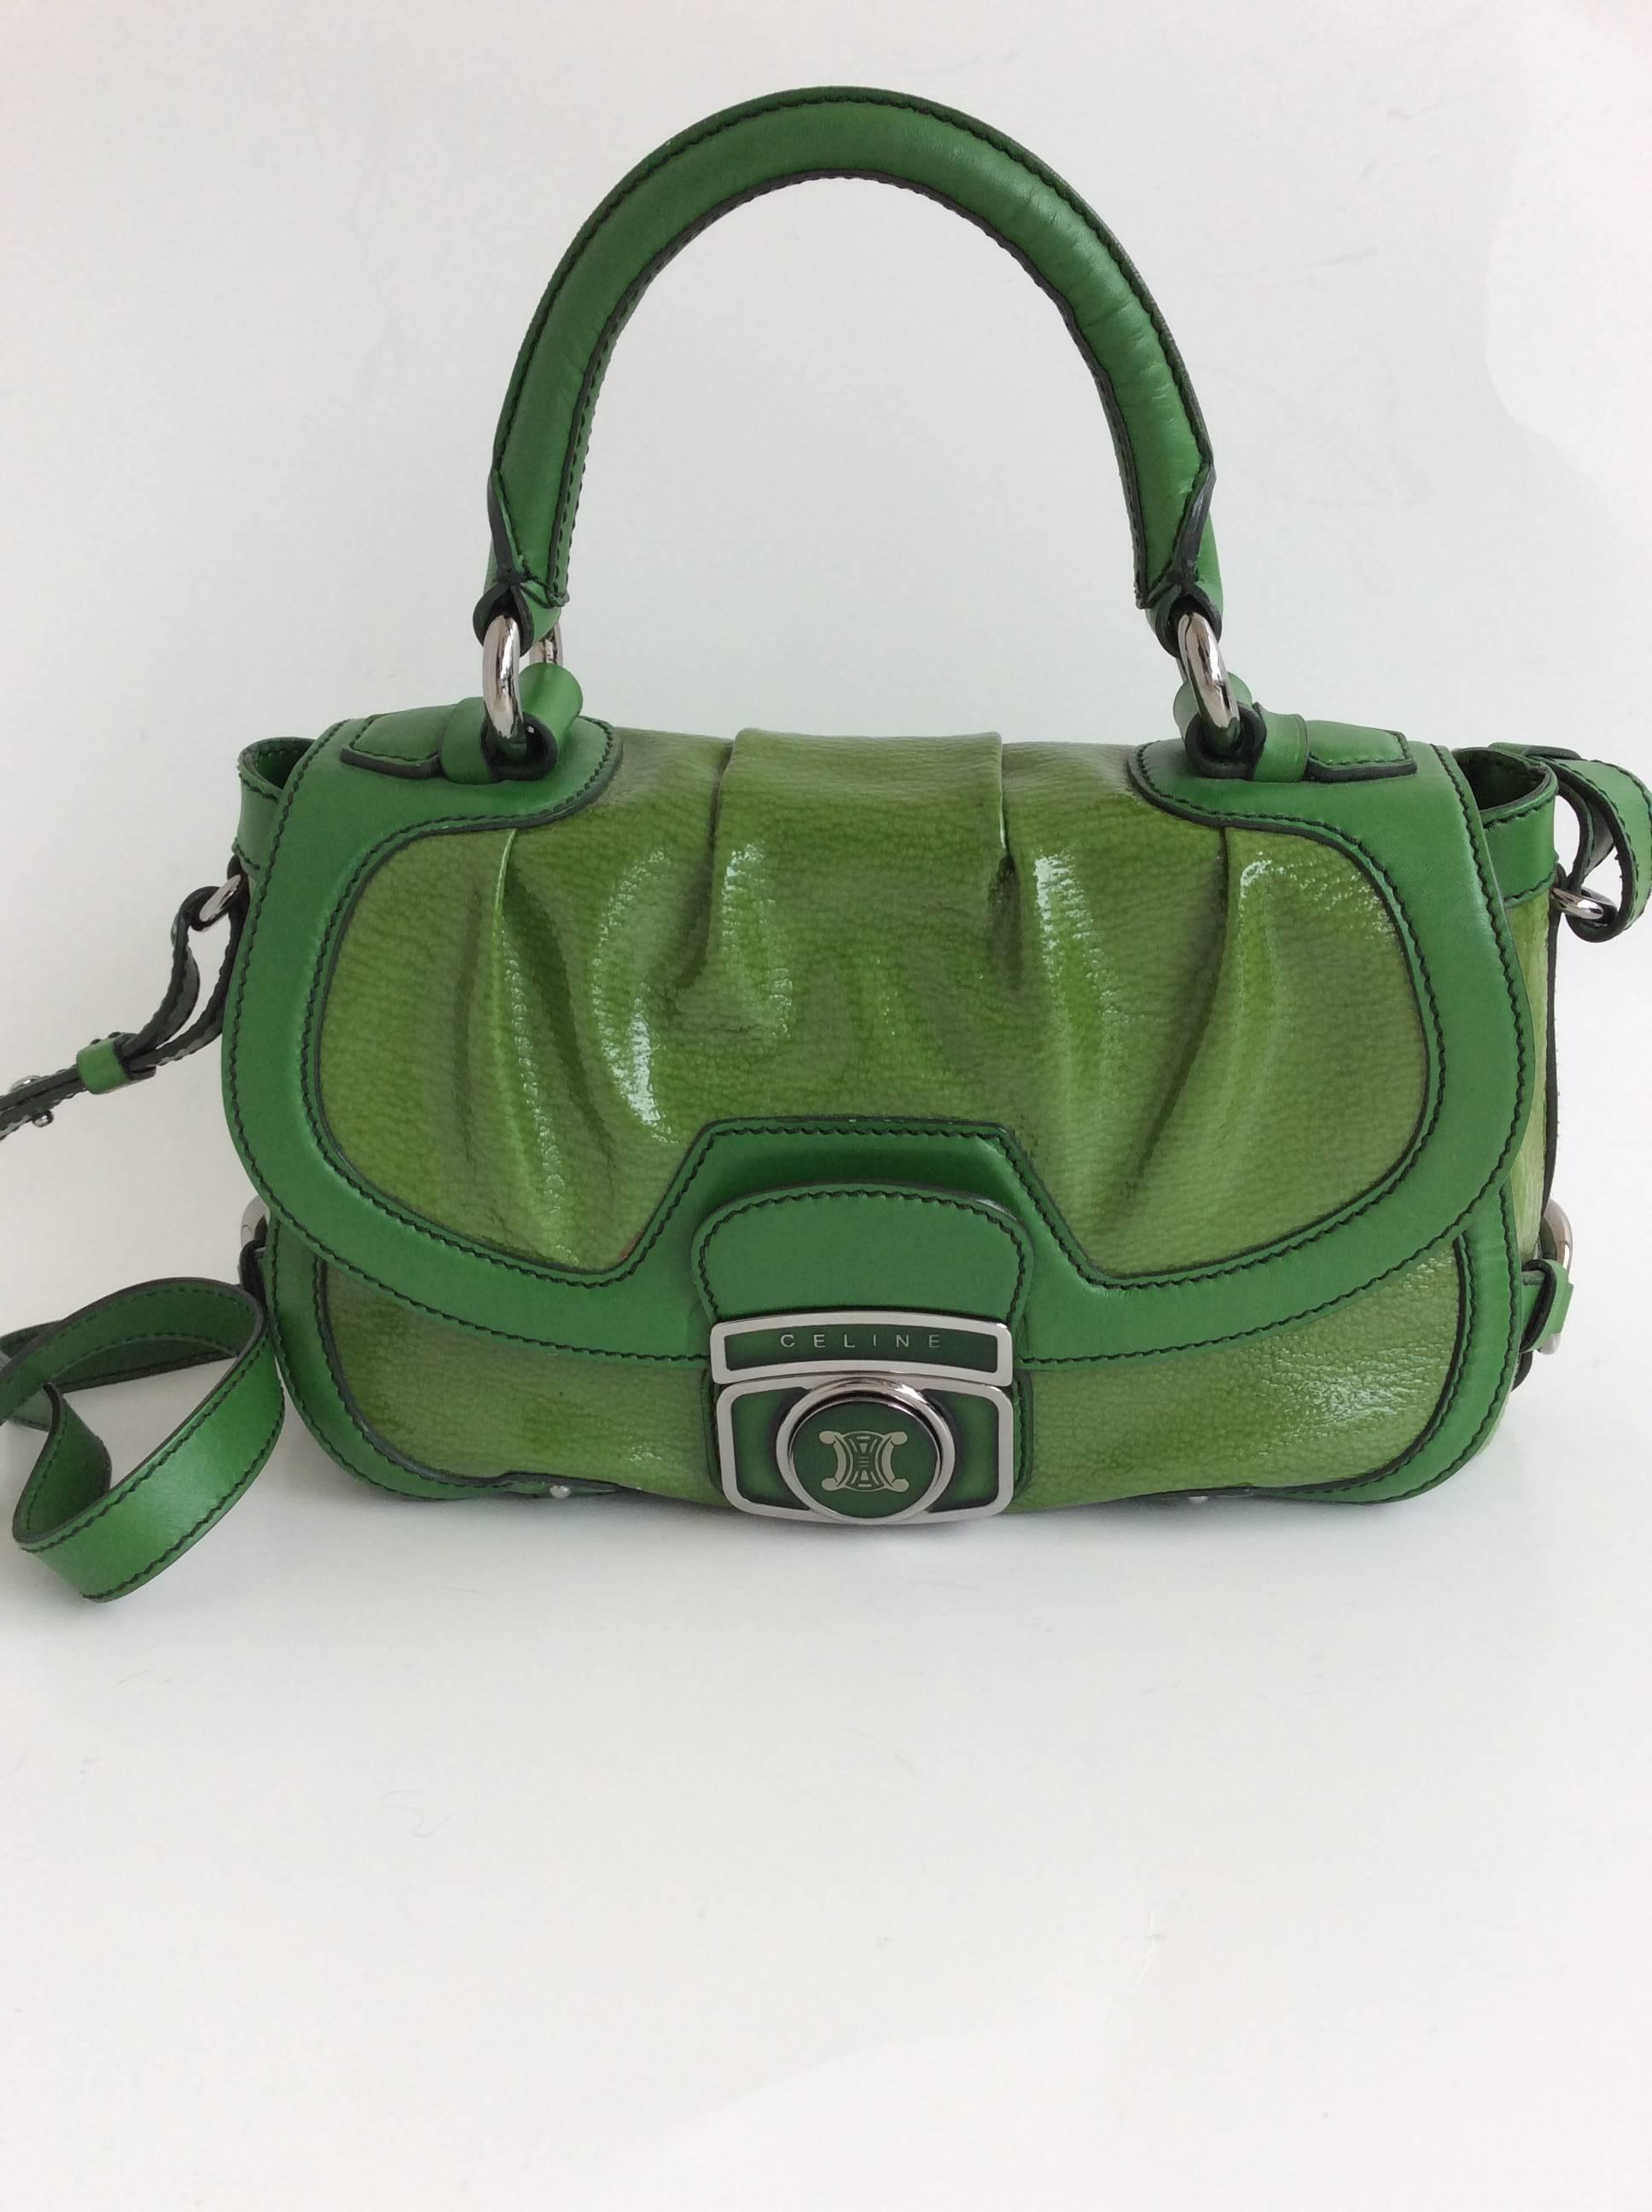 Shamrock green Celine patent leather satchel with silver toned hardware. Celine logo at front, single pocket under front flap, three interior pockets, push-lock closure at front. Soft leather trim throughout. Adjustable shoulder strap attached.